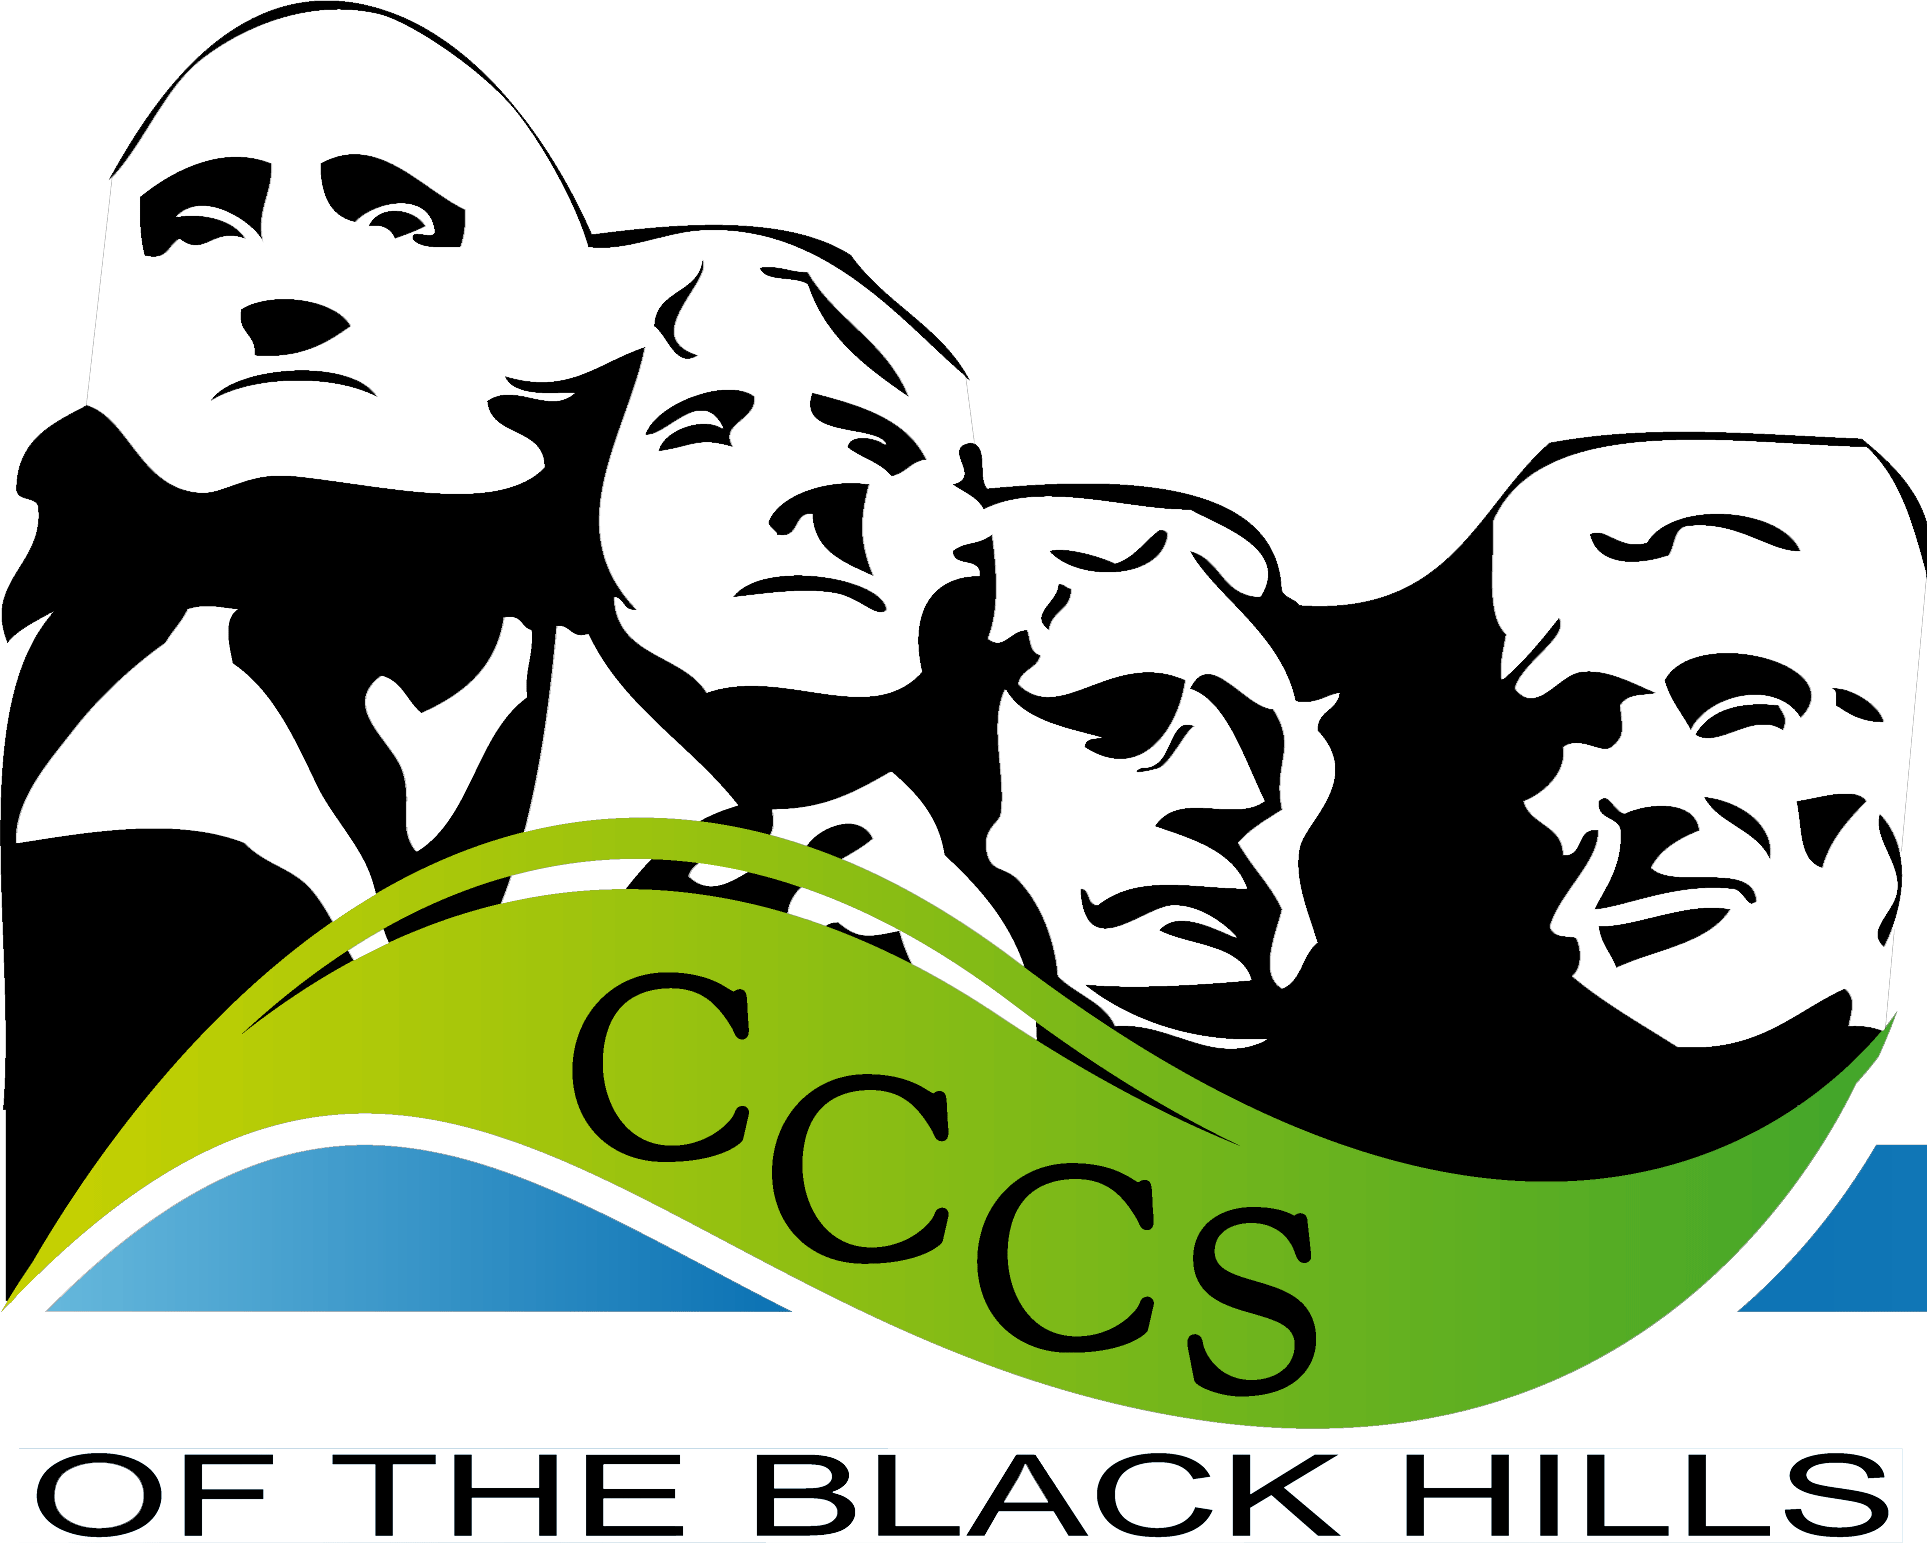 Logo of Mount Rushmore with CCCS of the Black Hills under it